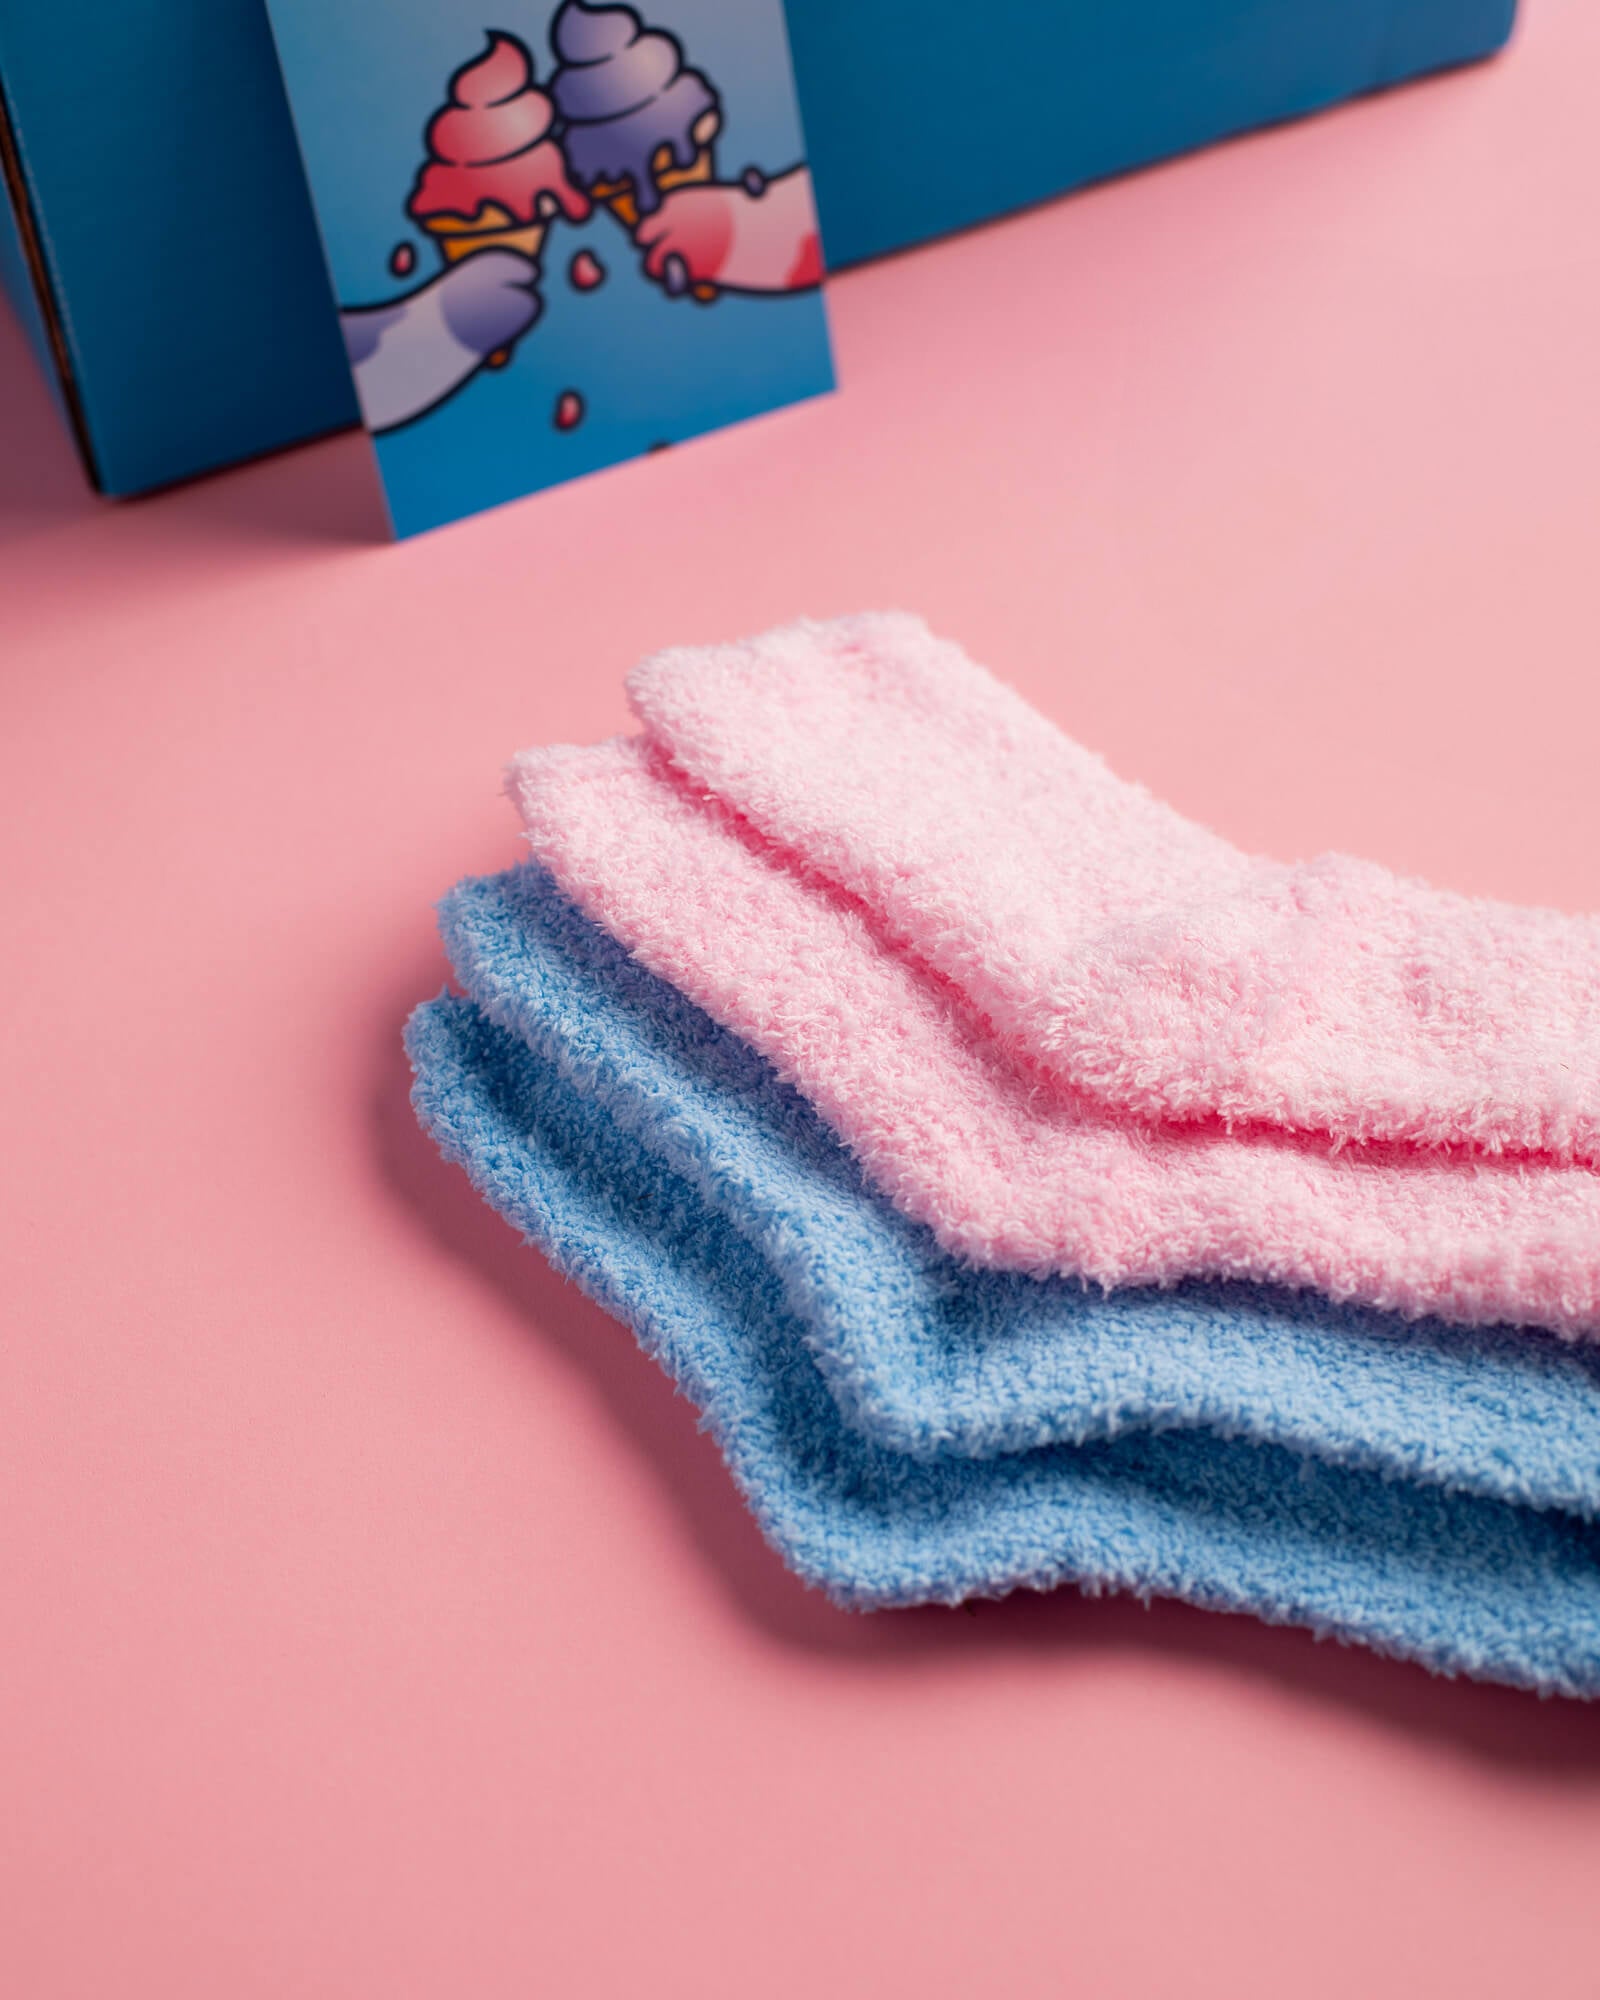 Photo of pink and blue fuzzy socks.